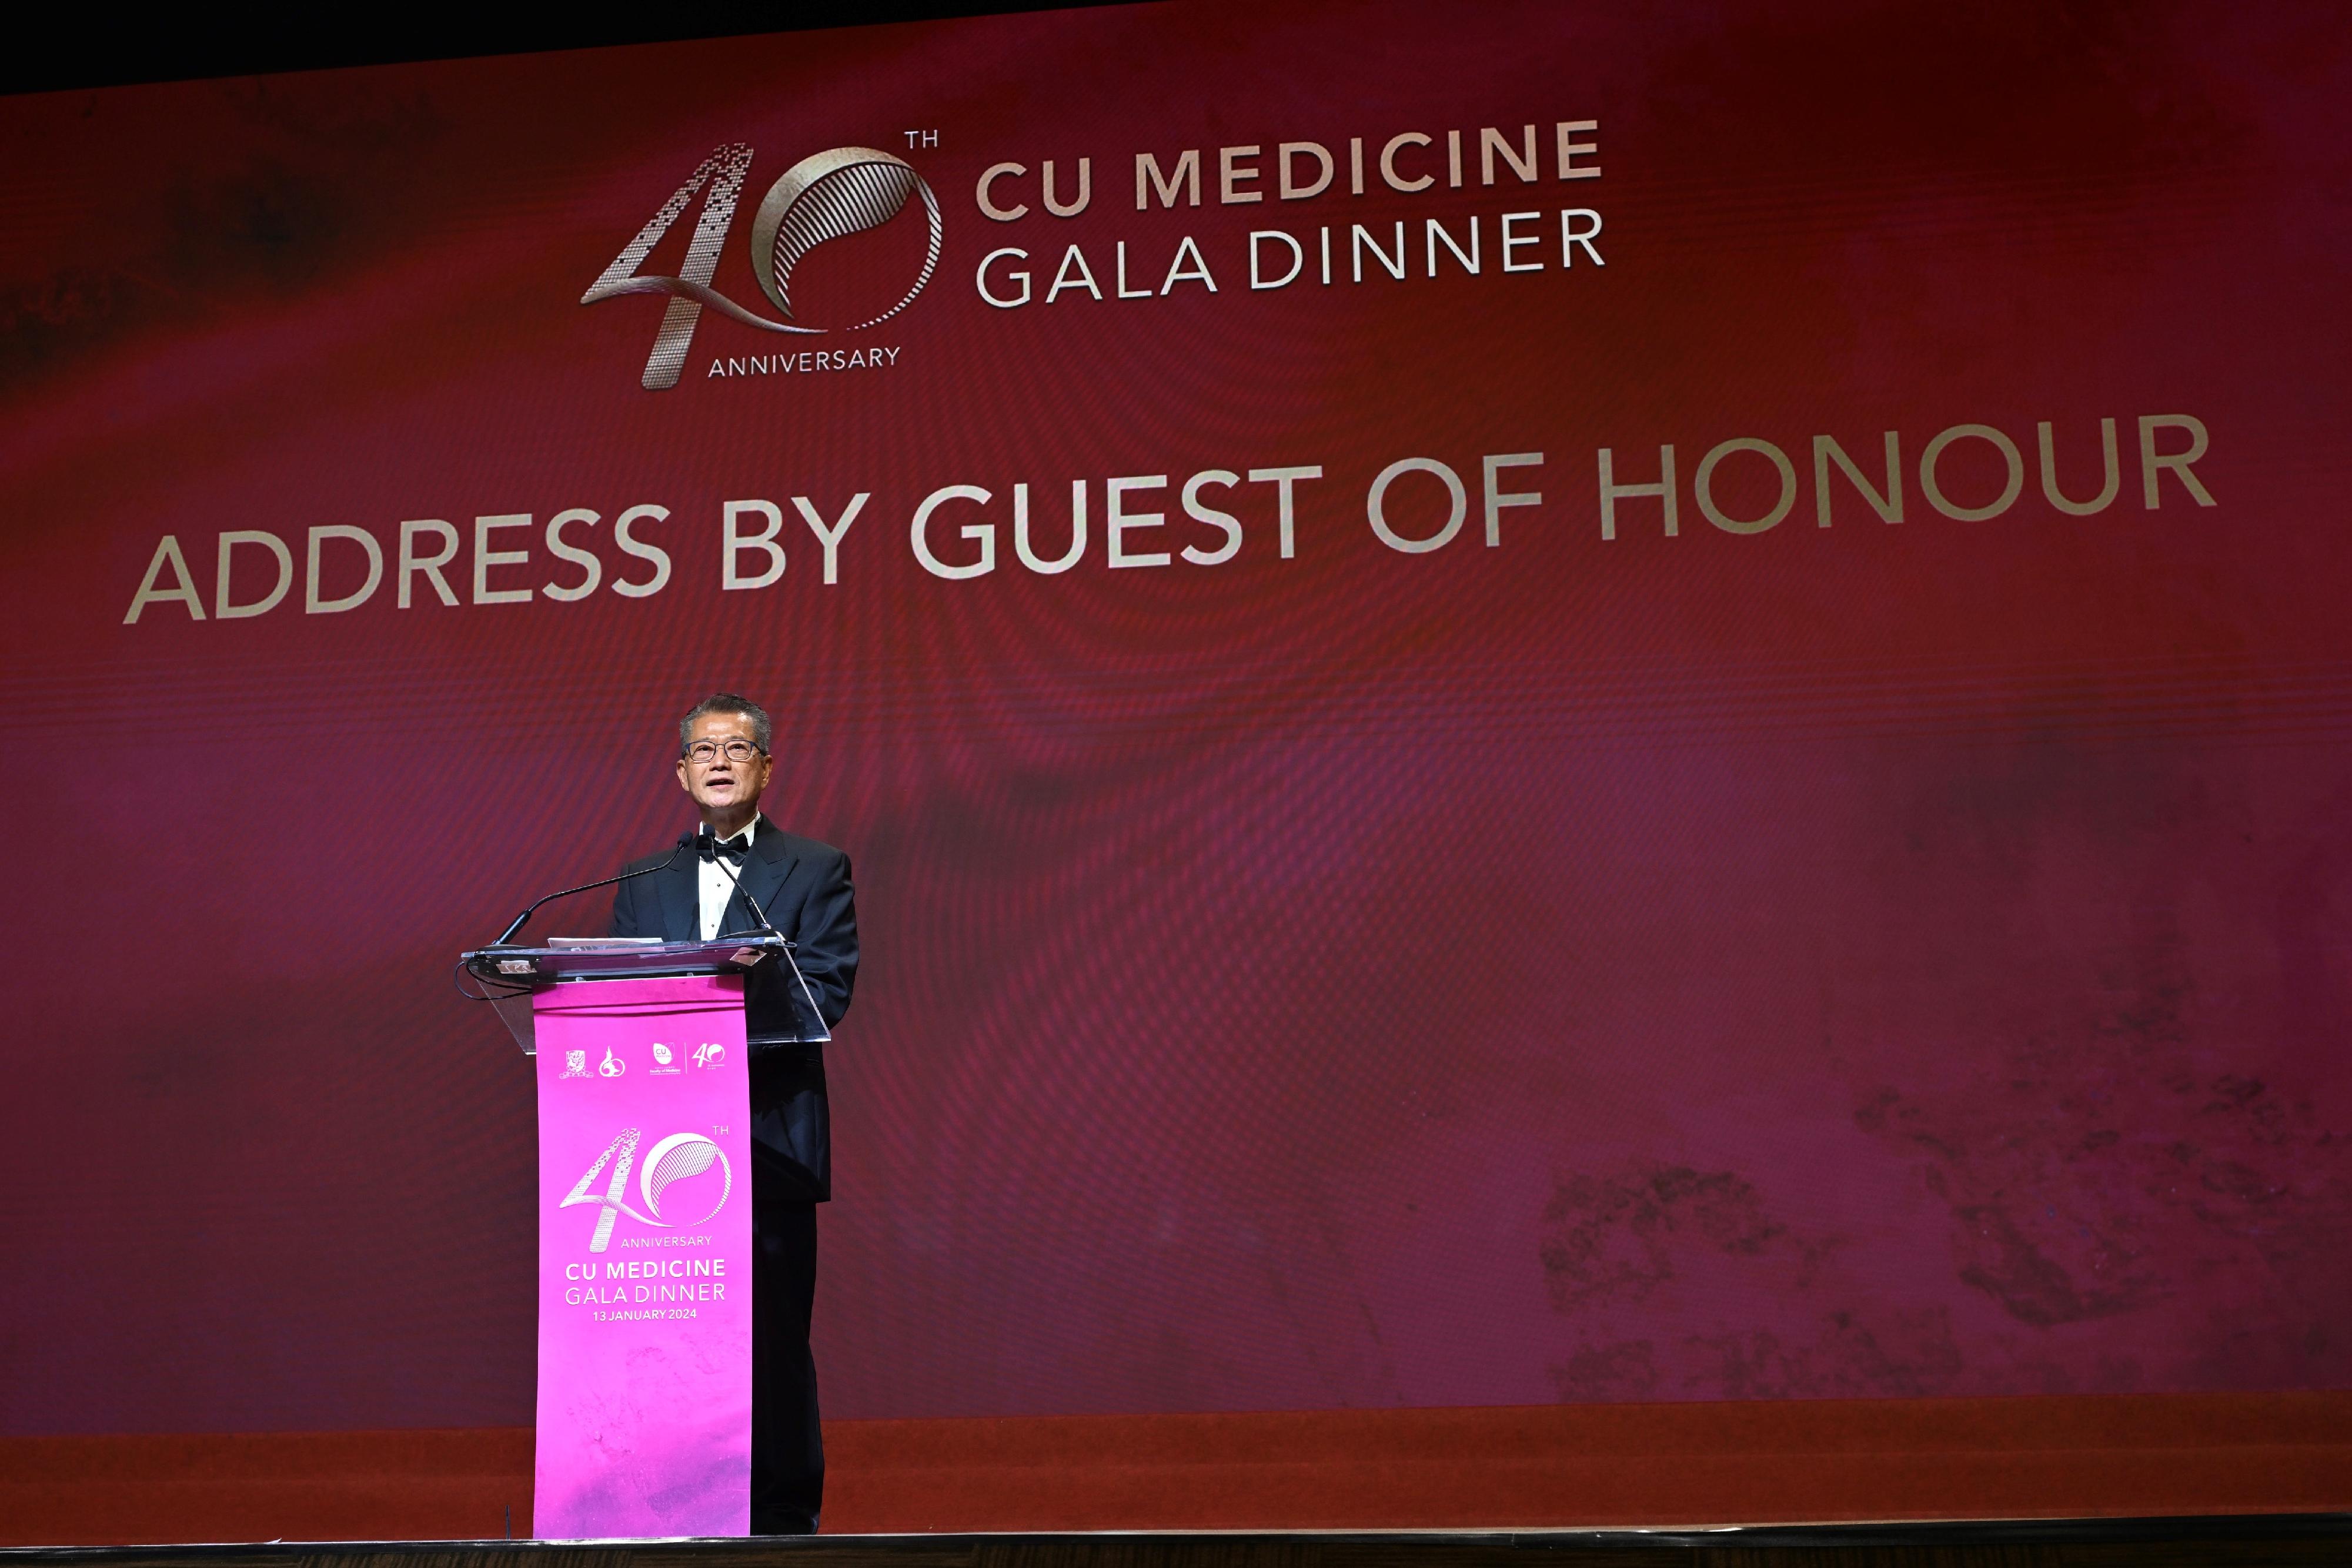 The Financial Secretary, Mr Paul Chan, speaks at the 40th Anniversary Faculty Gala Dinner hosted by the Faculty of Medicine of the Chinese University of Hong Kong this evening (January 13).